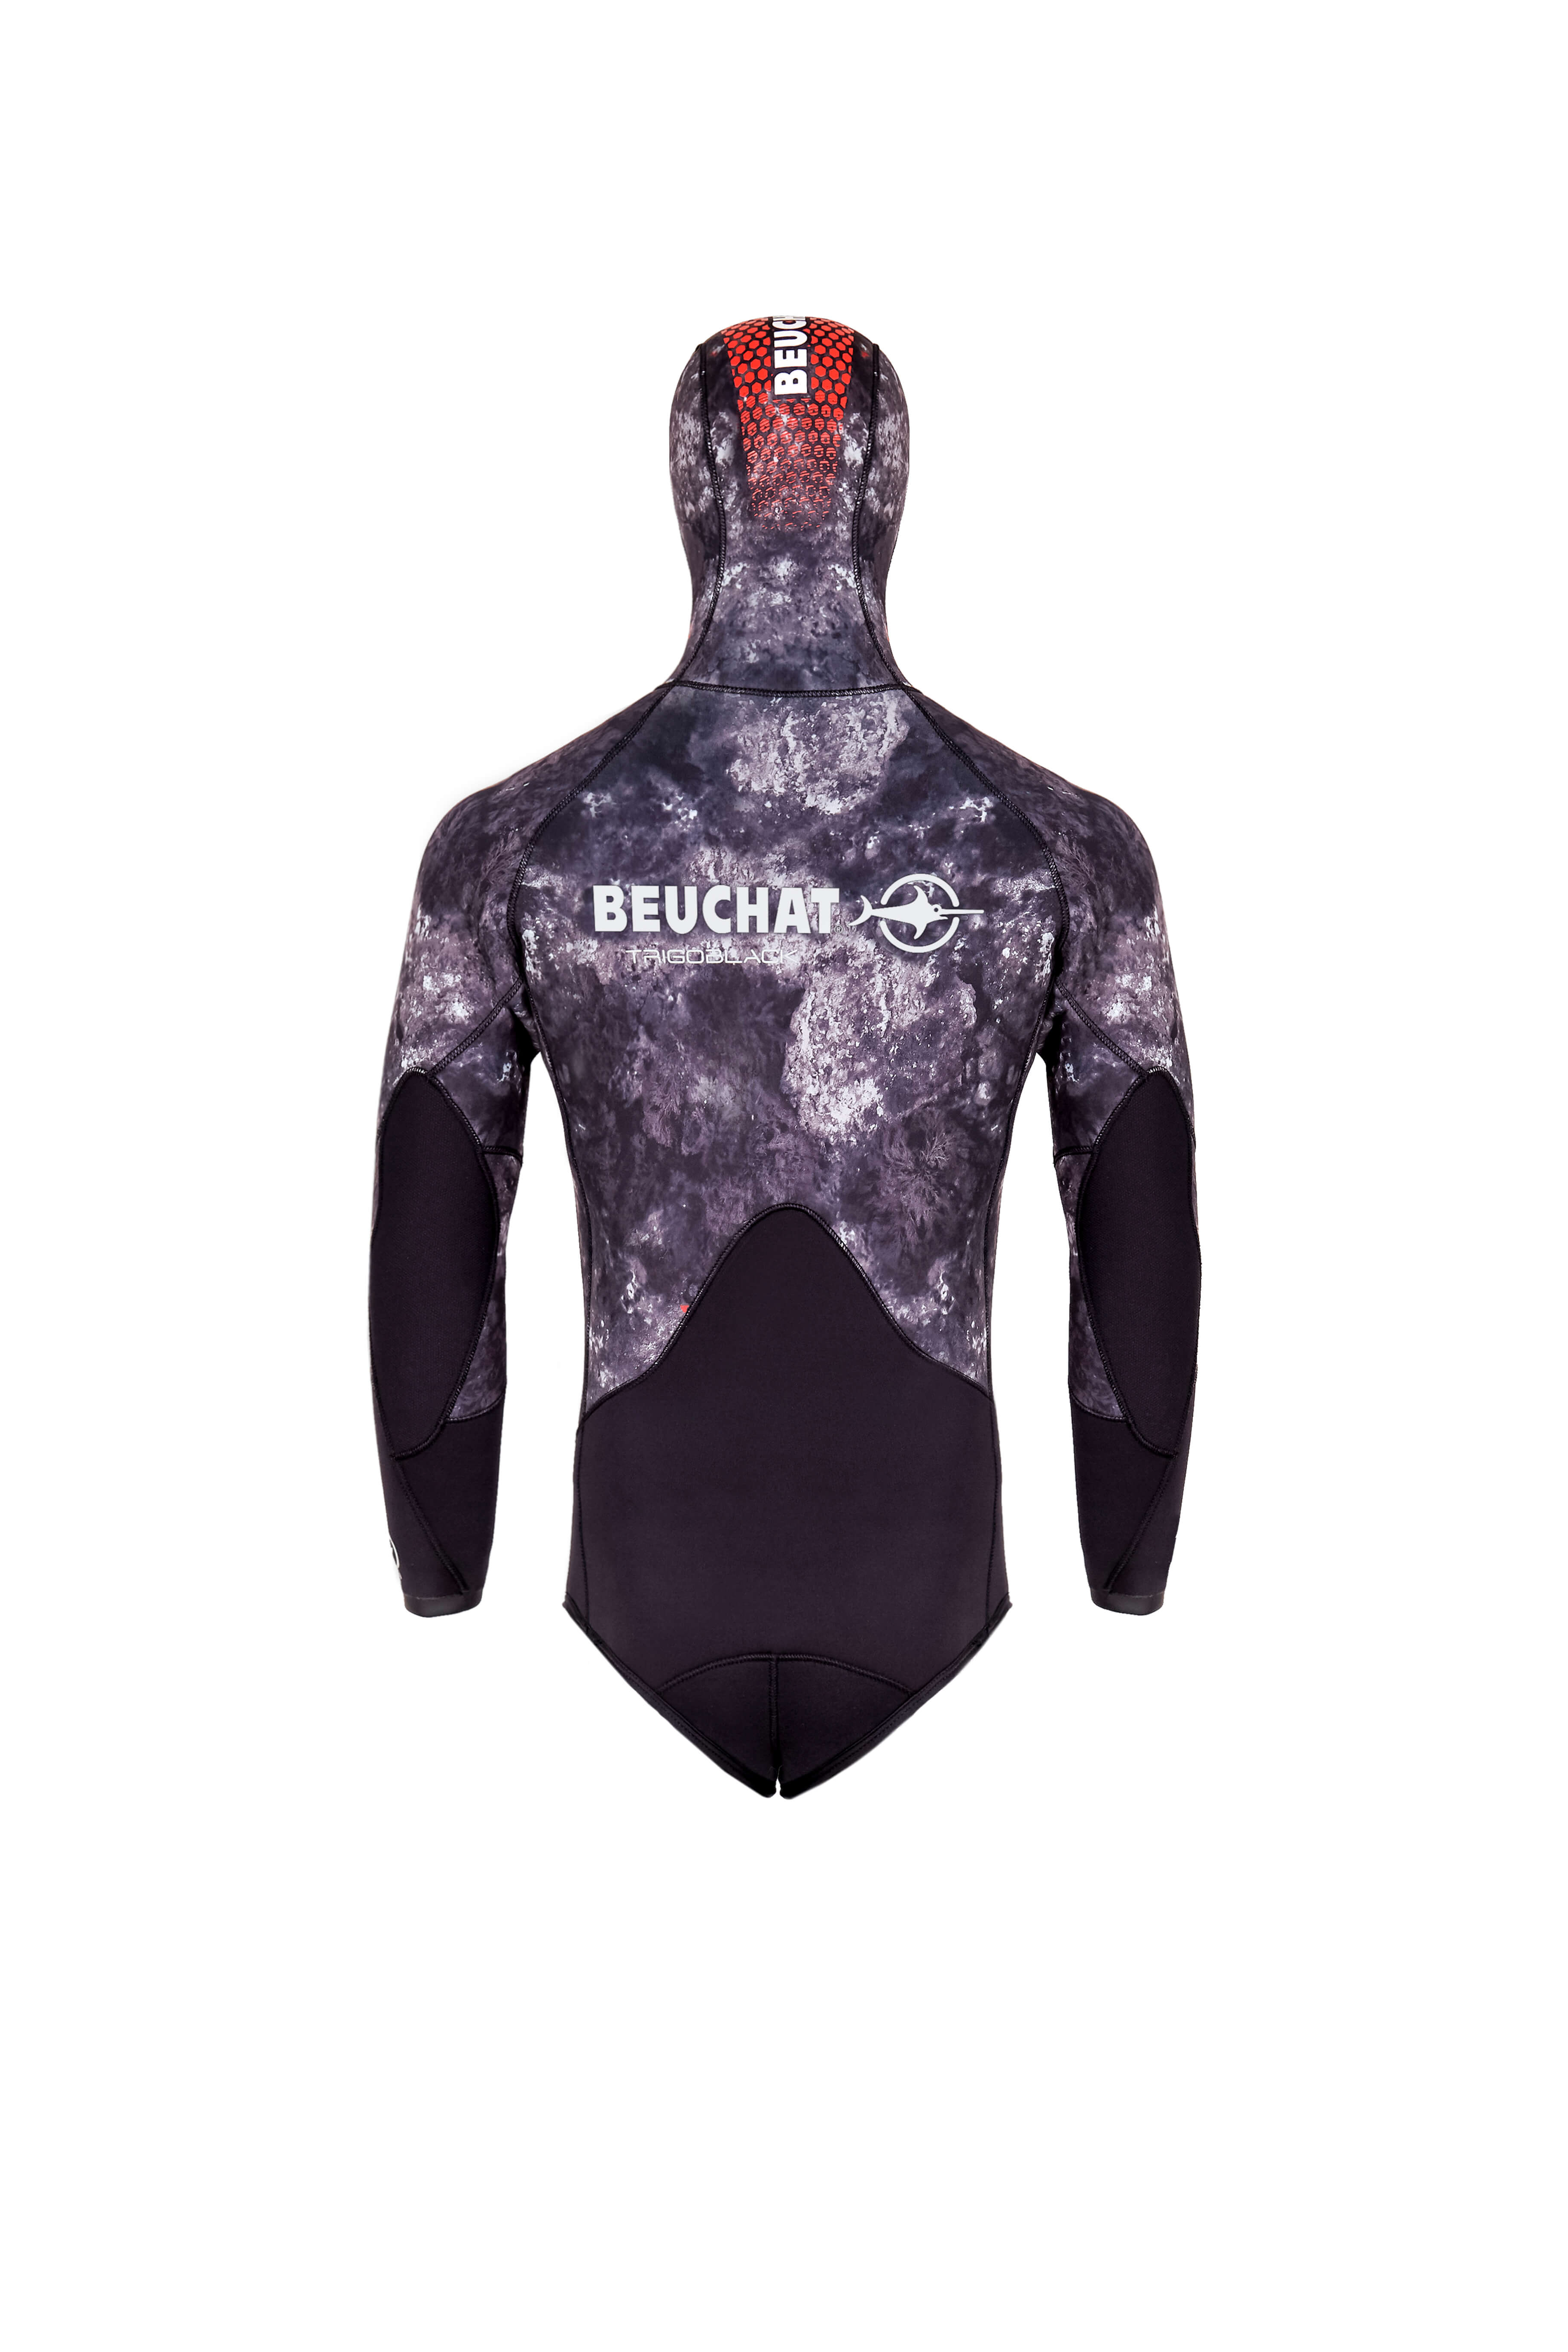 Beuchat Trigoblack 5mm Opencell Jacket